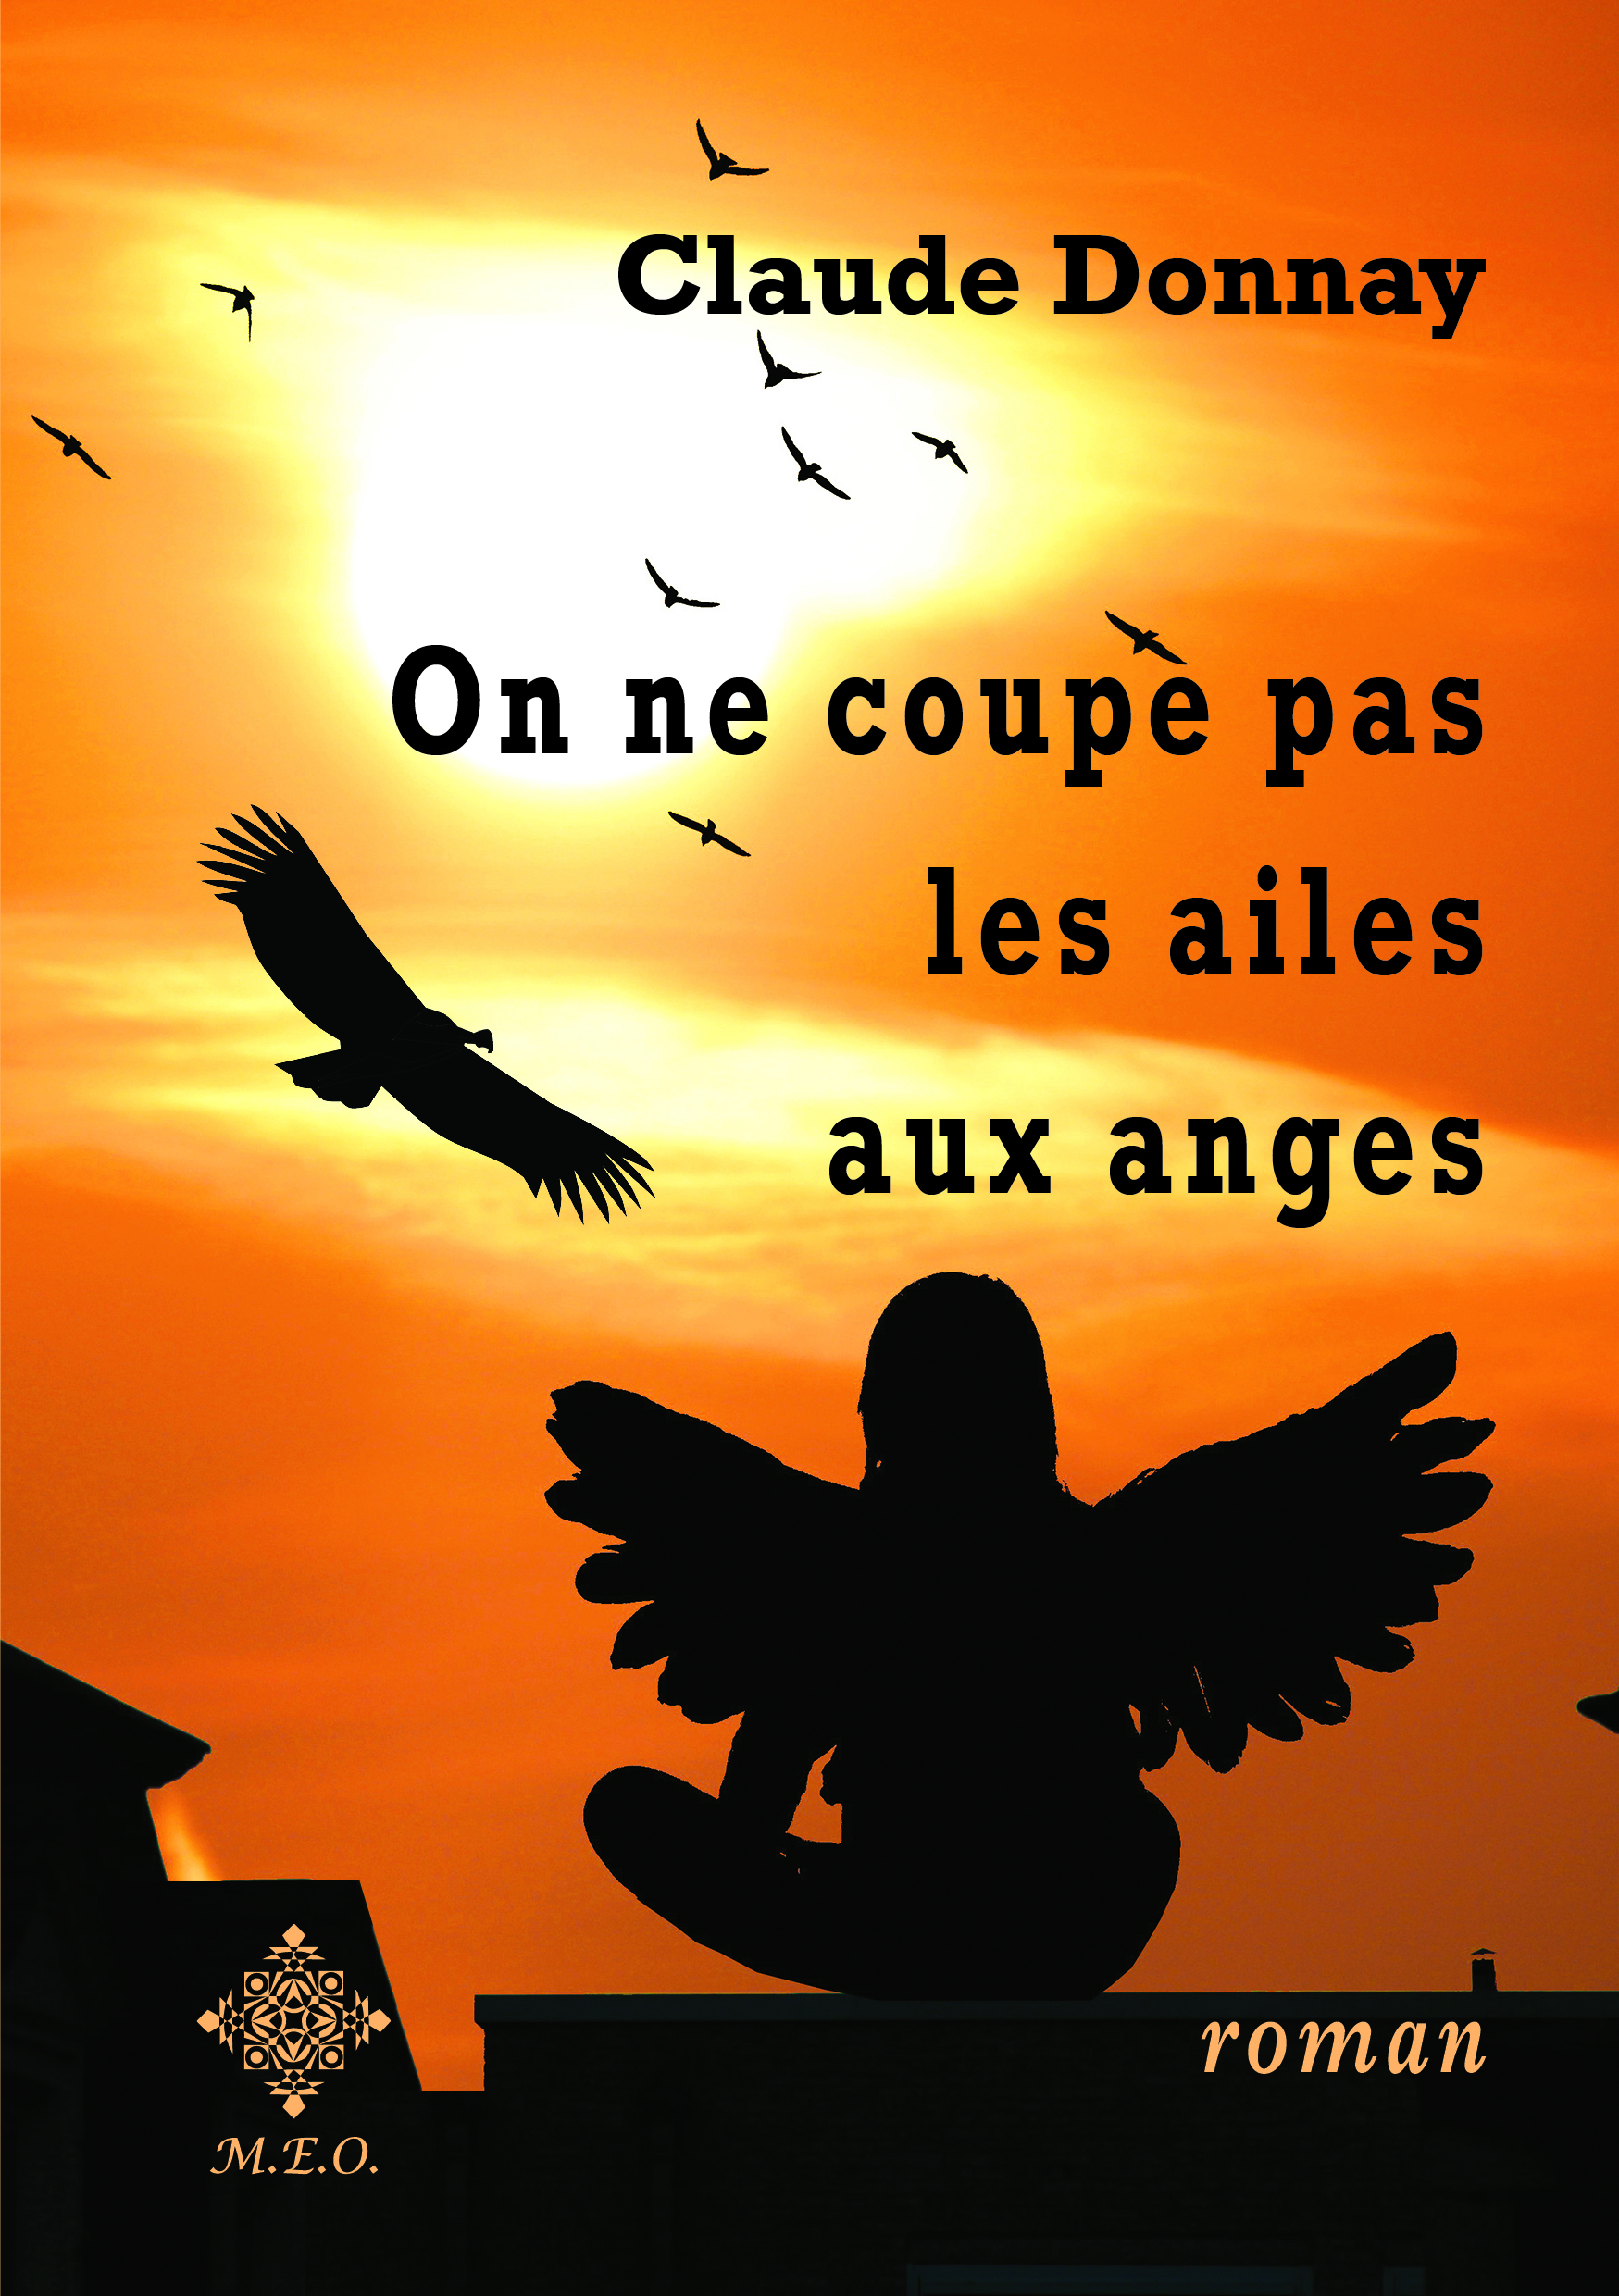 On ne coupe pas les ailes aux anges / We don't cut the wings of the angels